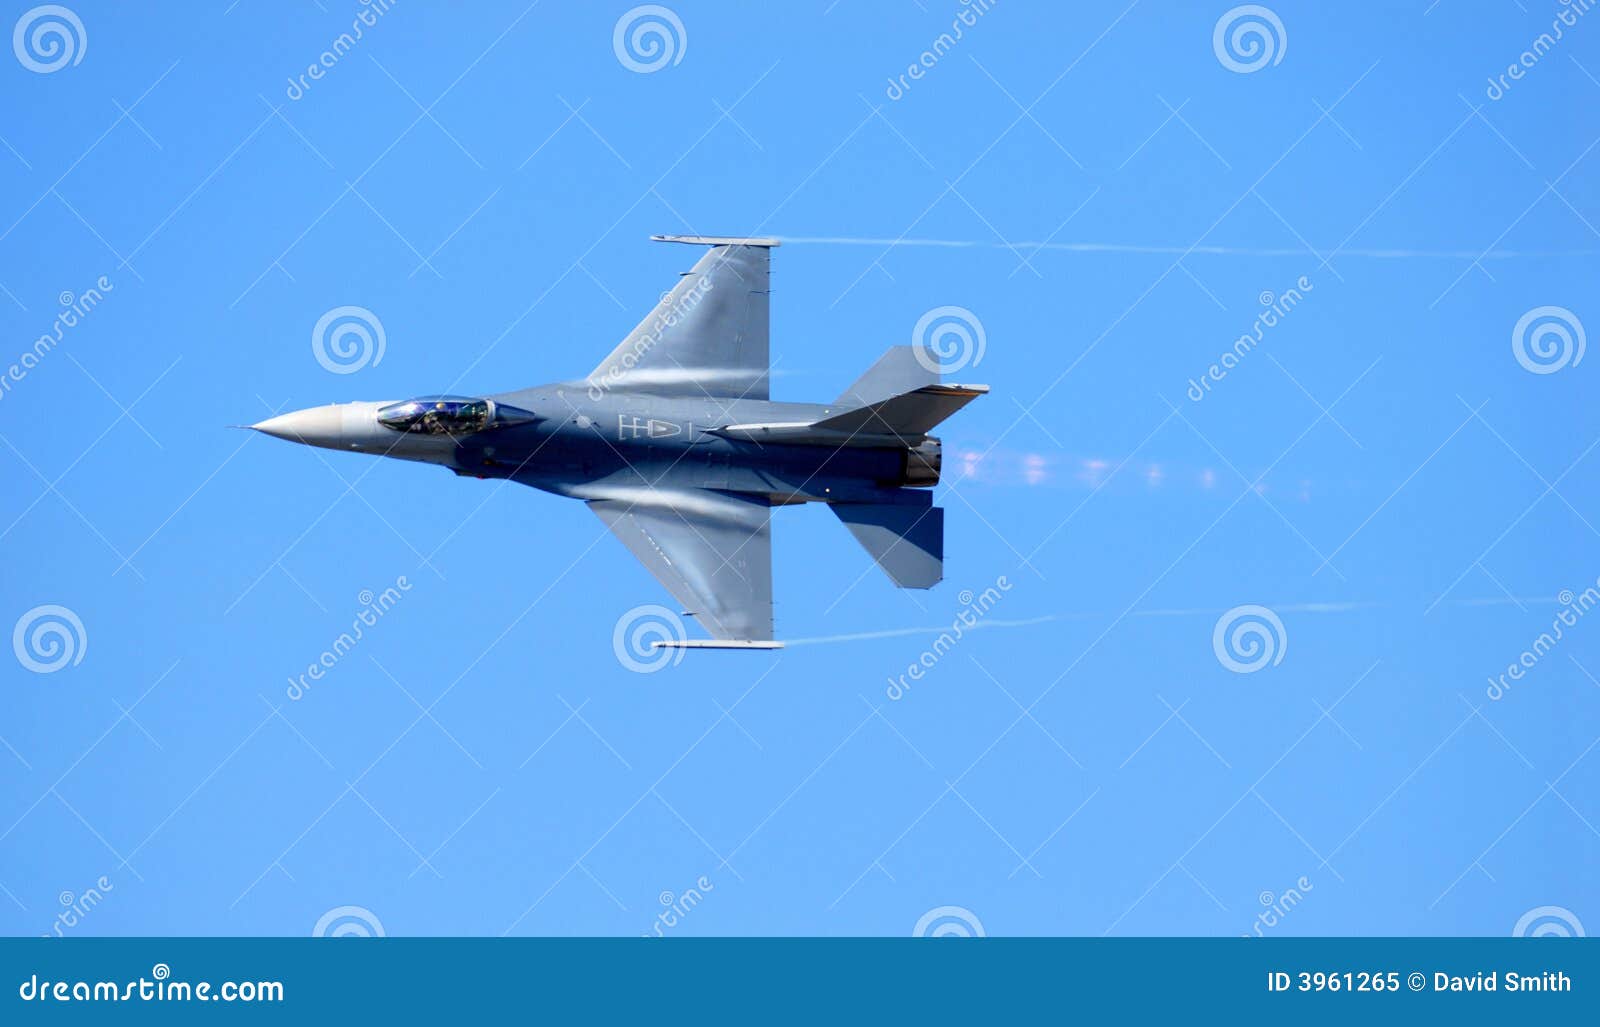 navy f-14 reaching supersonic speed